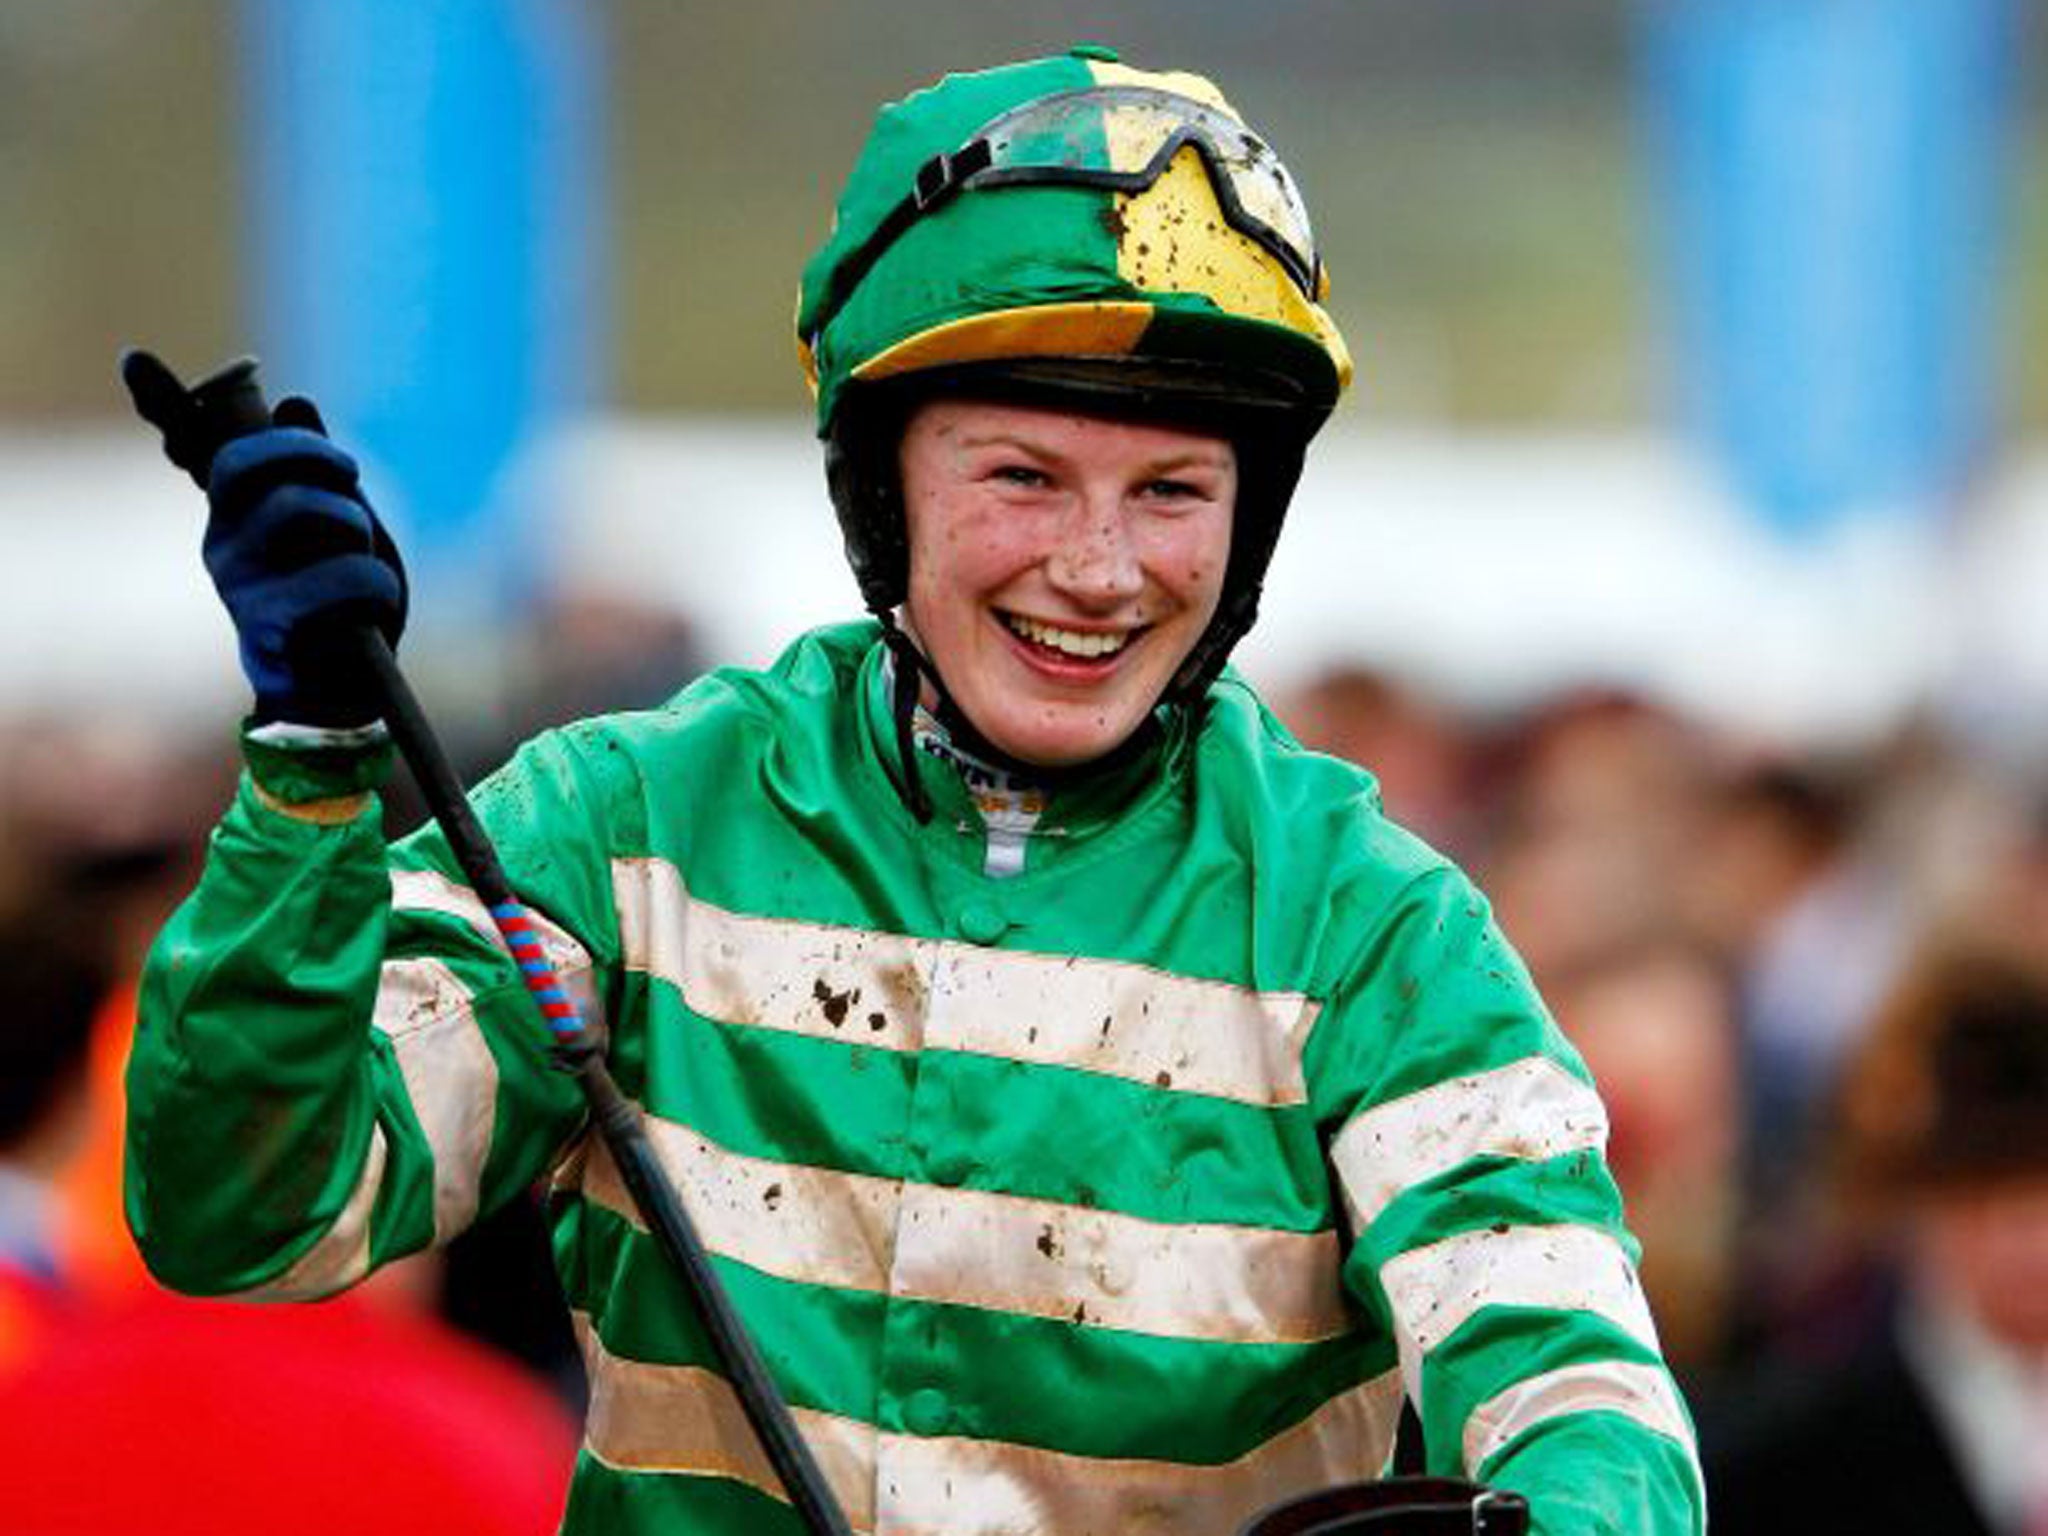 Nina Carberry may be going for glory on Tofino Bay in the big race at Aintree